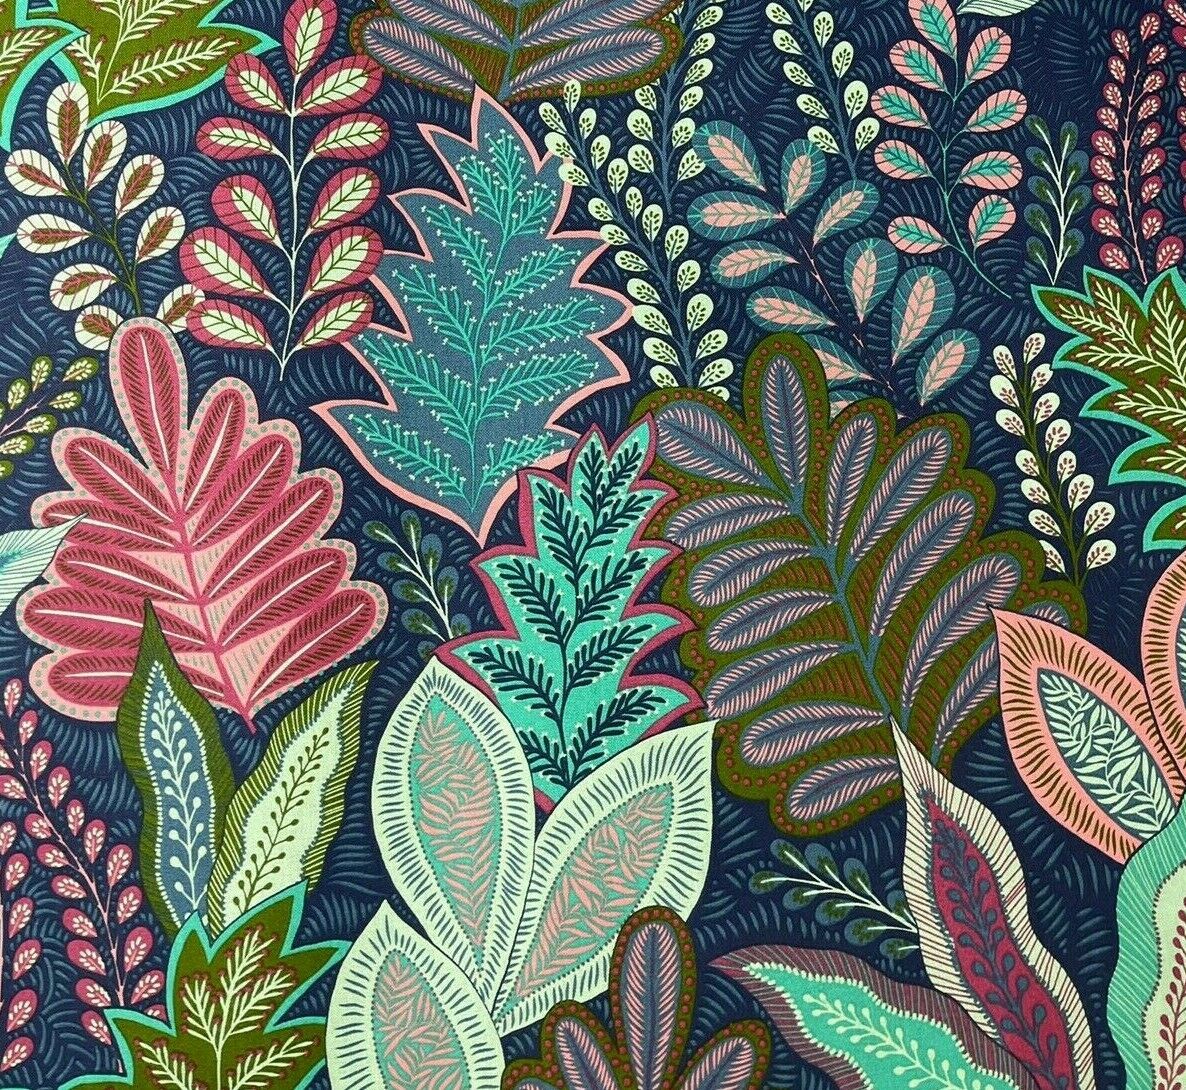 Blue Botanical Garden Printed Cotton Fabric by Meter Purple Lila Leaves Plants